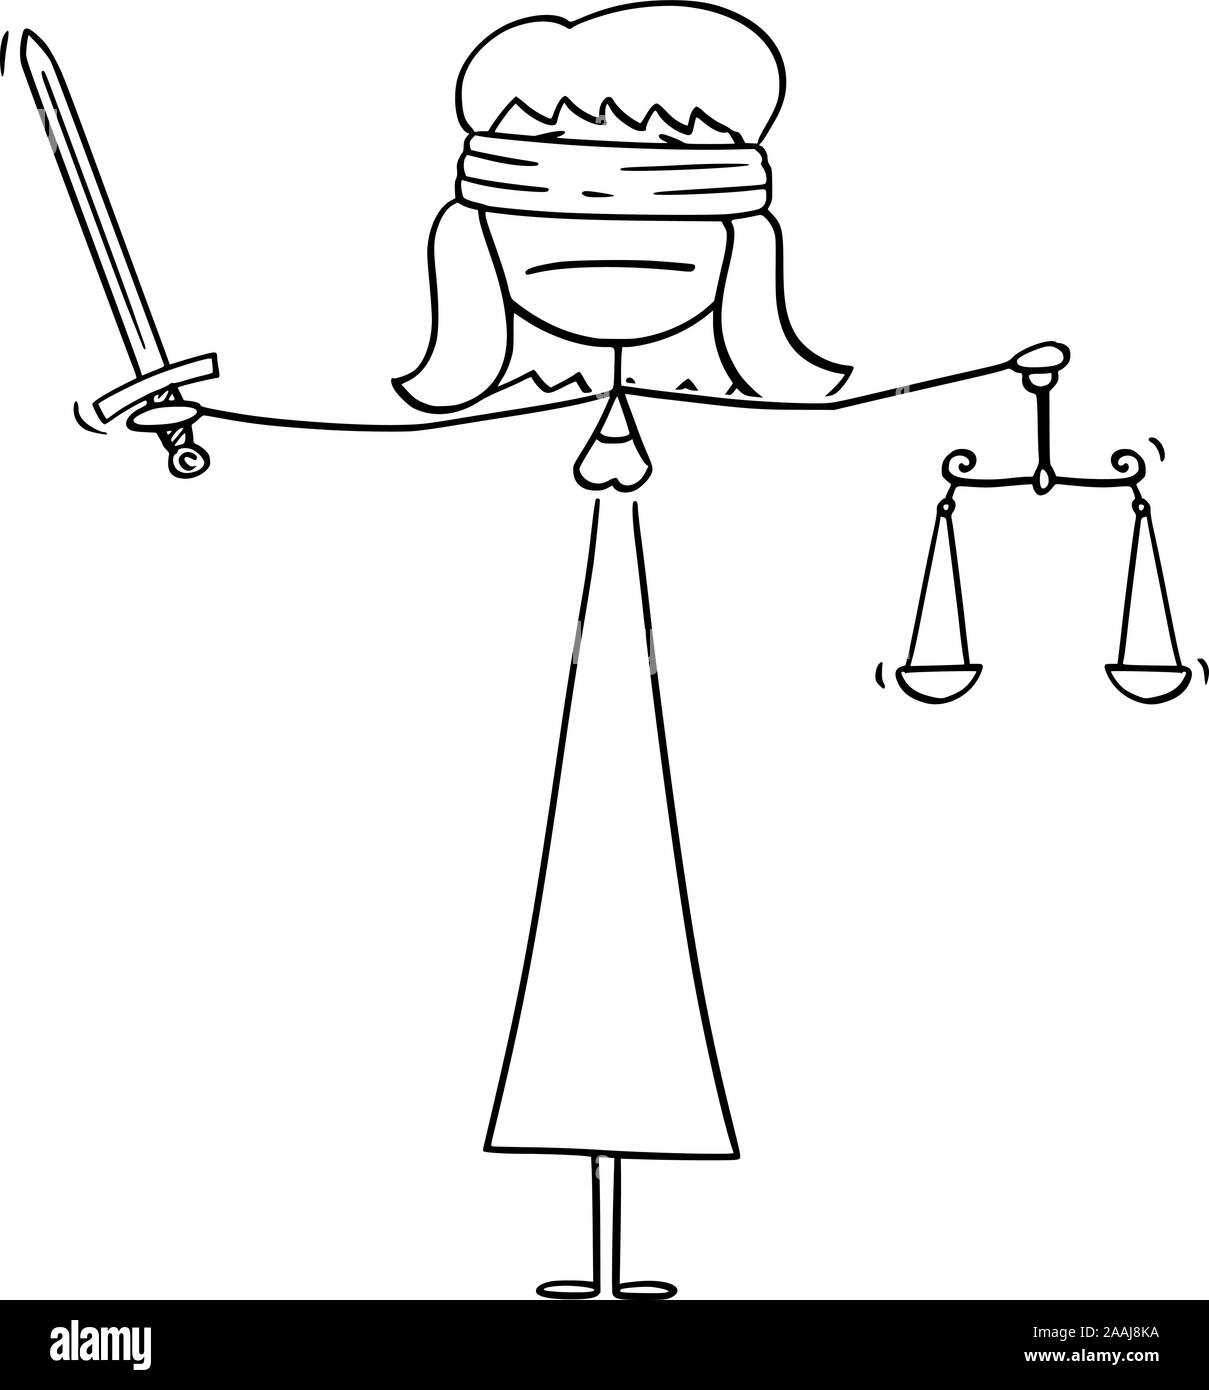 Blindfolded justitia Stock Vector Images - Alamy